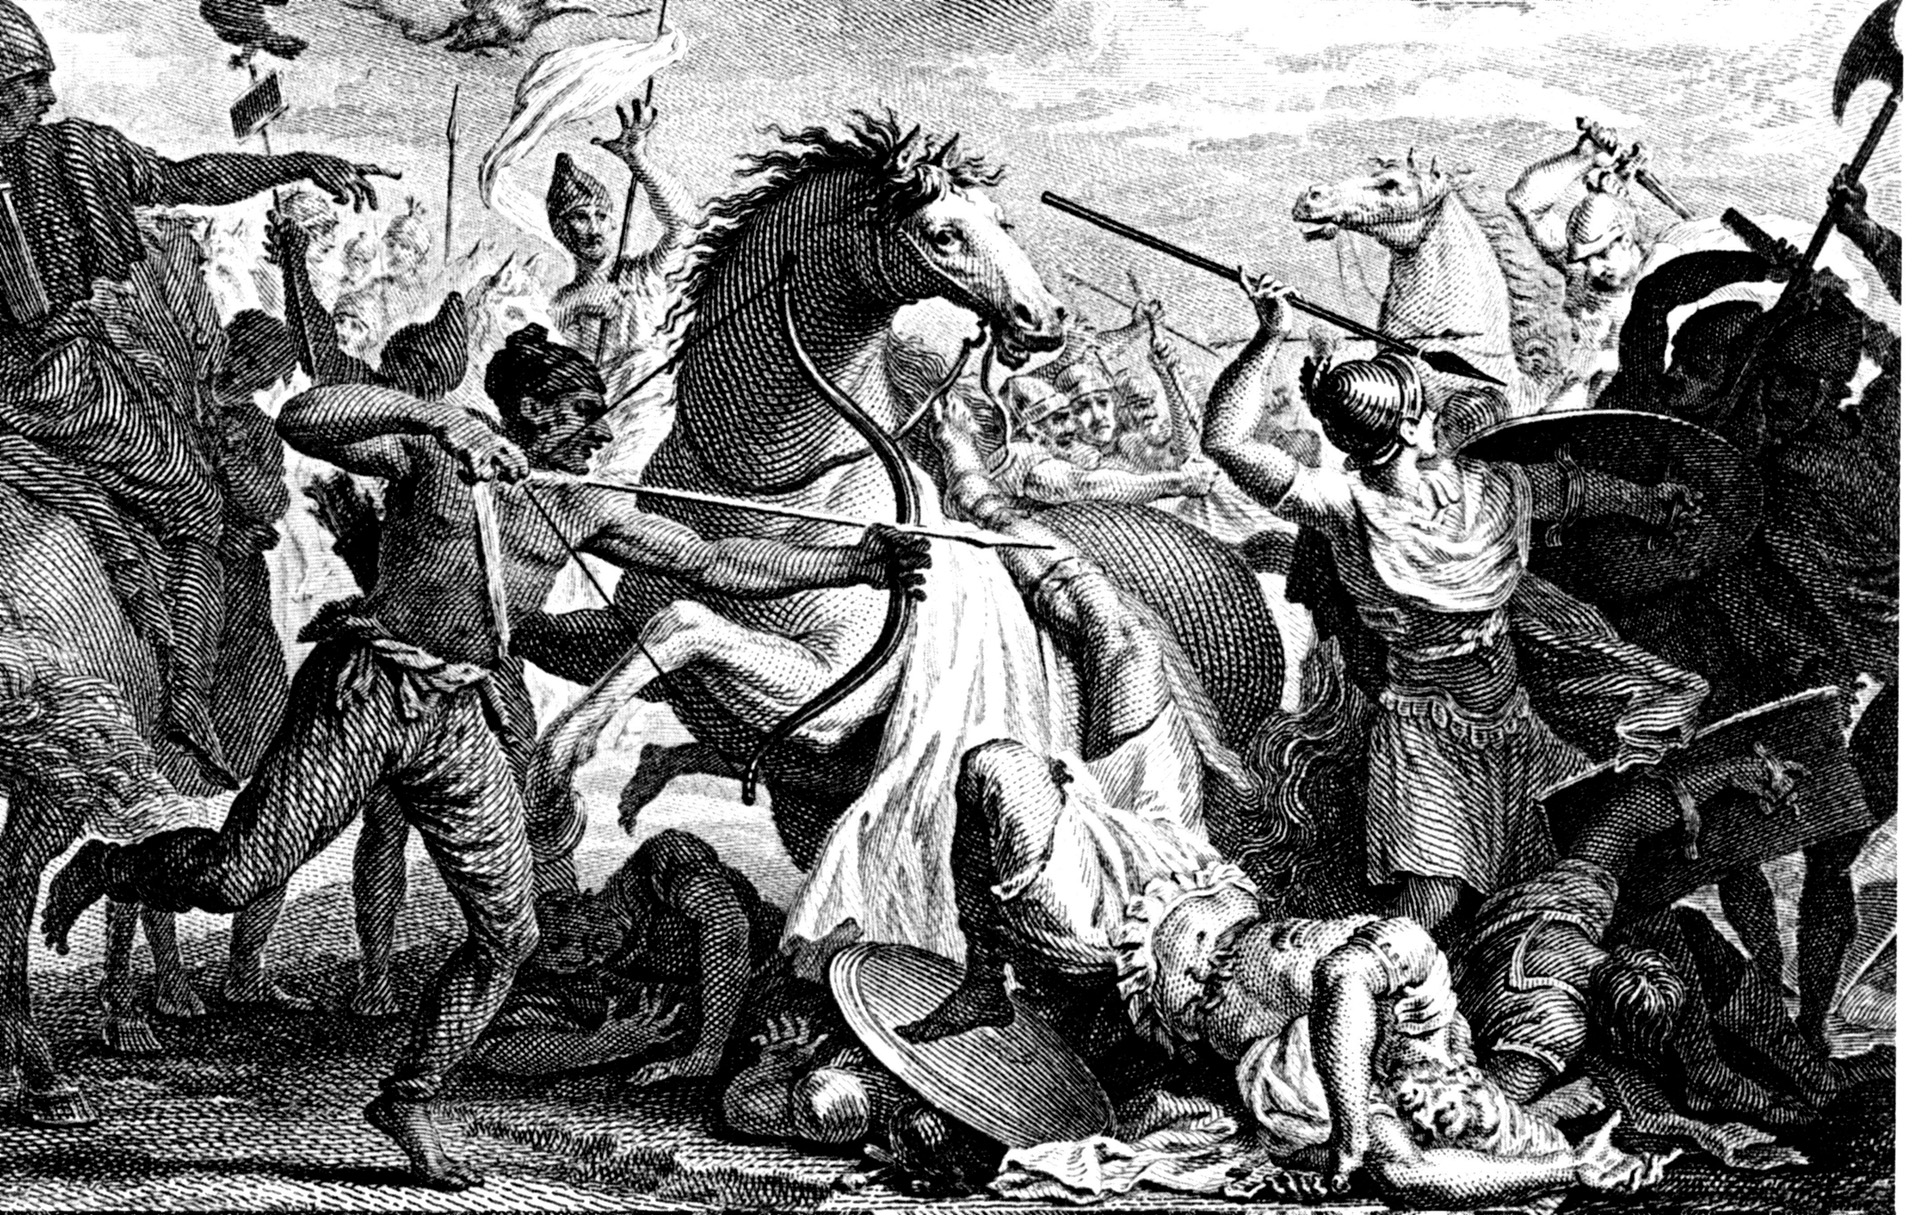 After the Parthians outfought his troops, Crassus tried to negotiate with Surena, but he was cut down in a scuffle. The Battle of Carrhae stands as one of the most disastrous defeats Roman history.